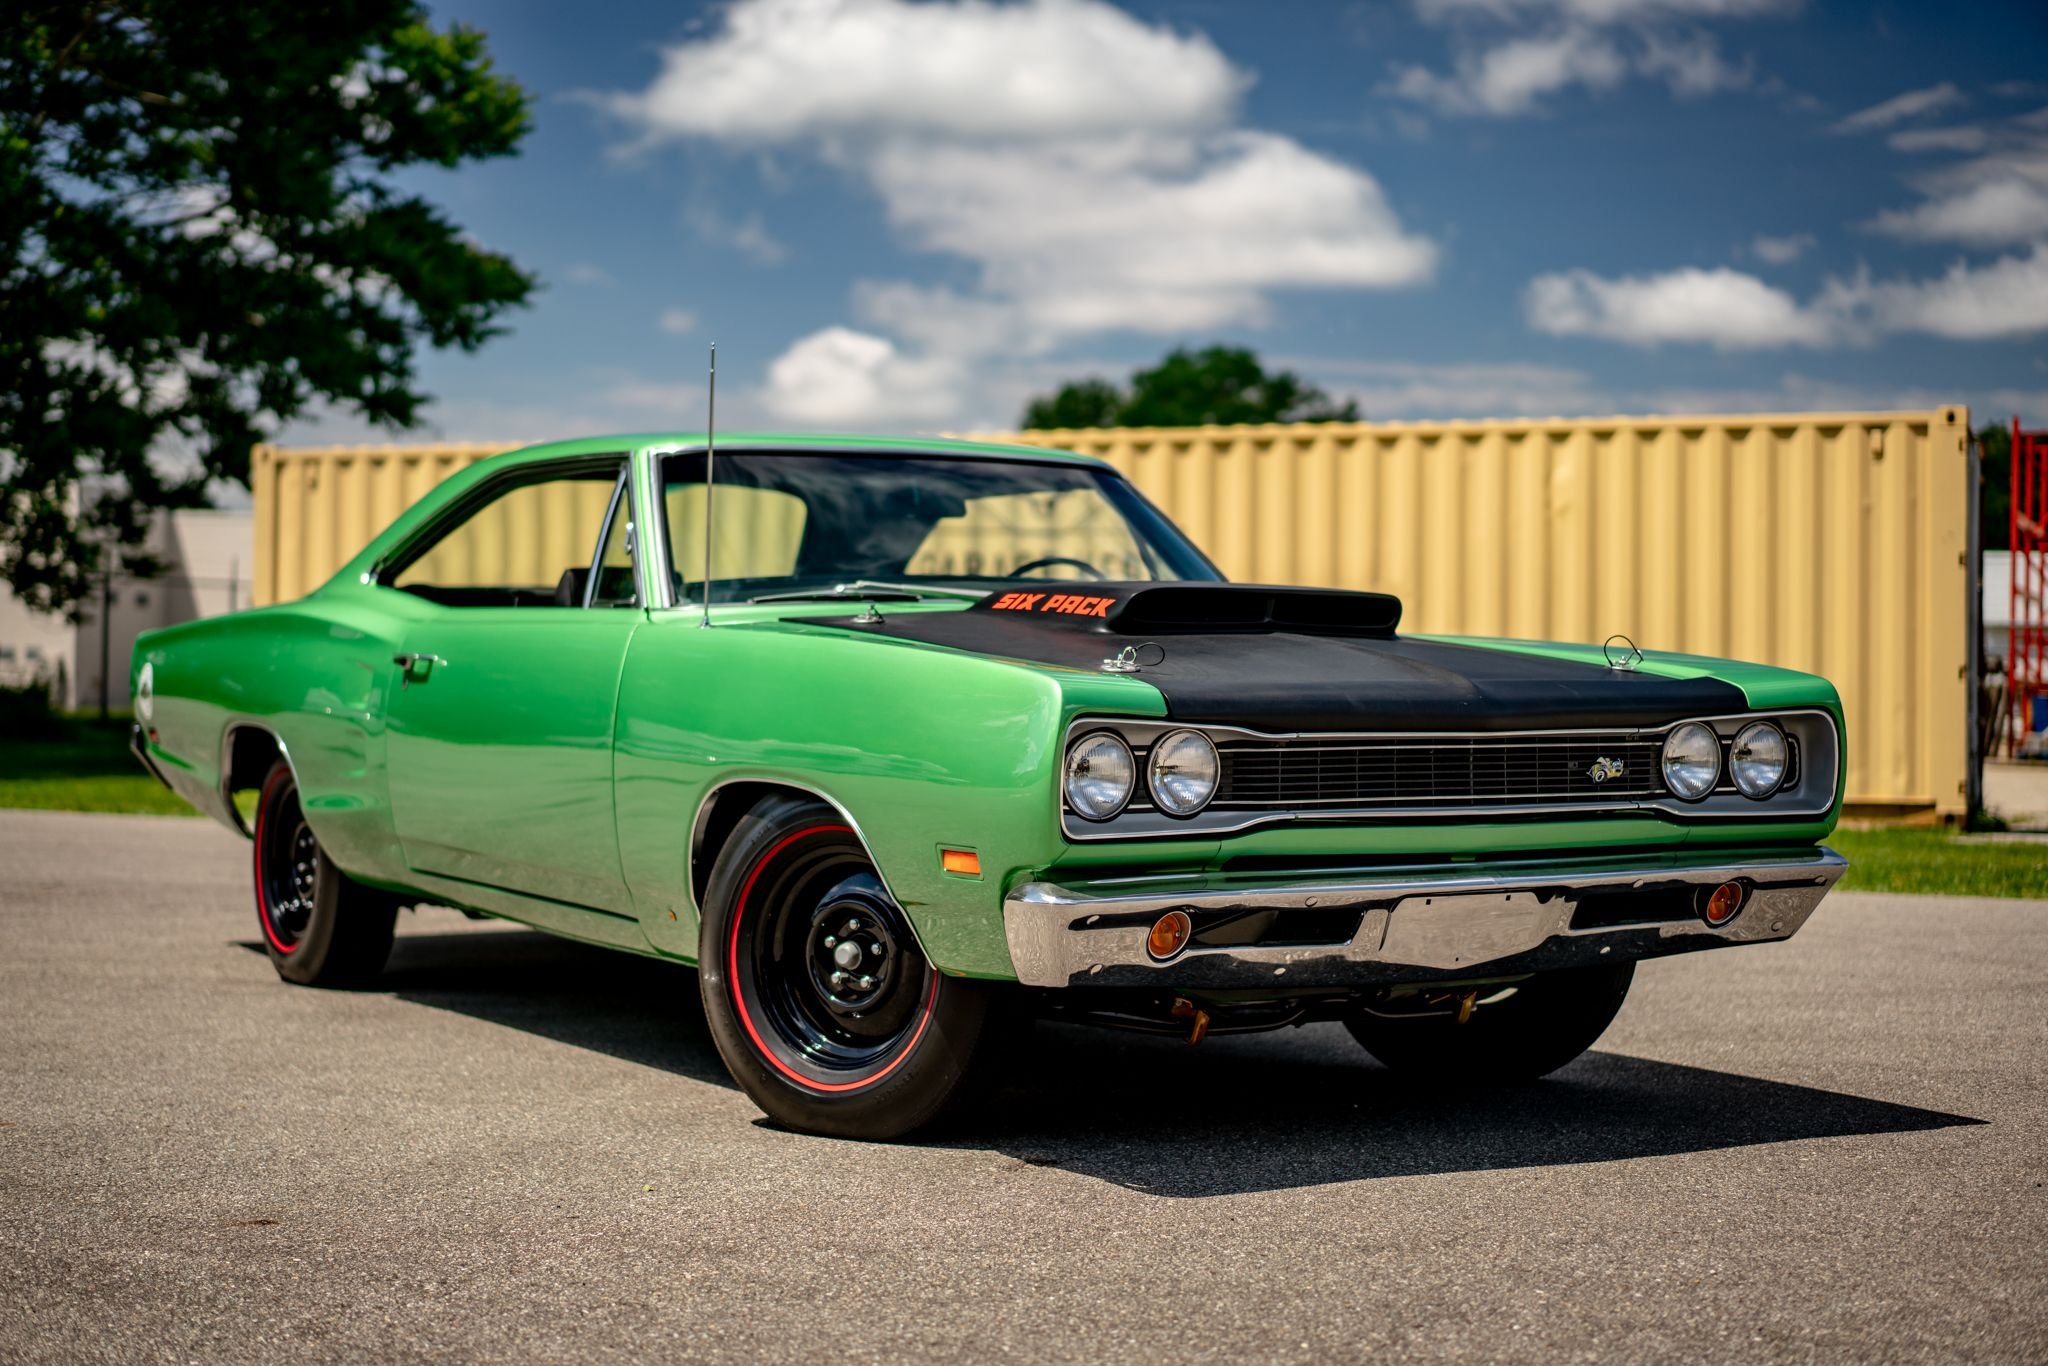 1969 Dodge Super Bee With 440ci Six Pack Will Make Everyone Go Green With  Envy - autoevolution